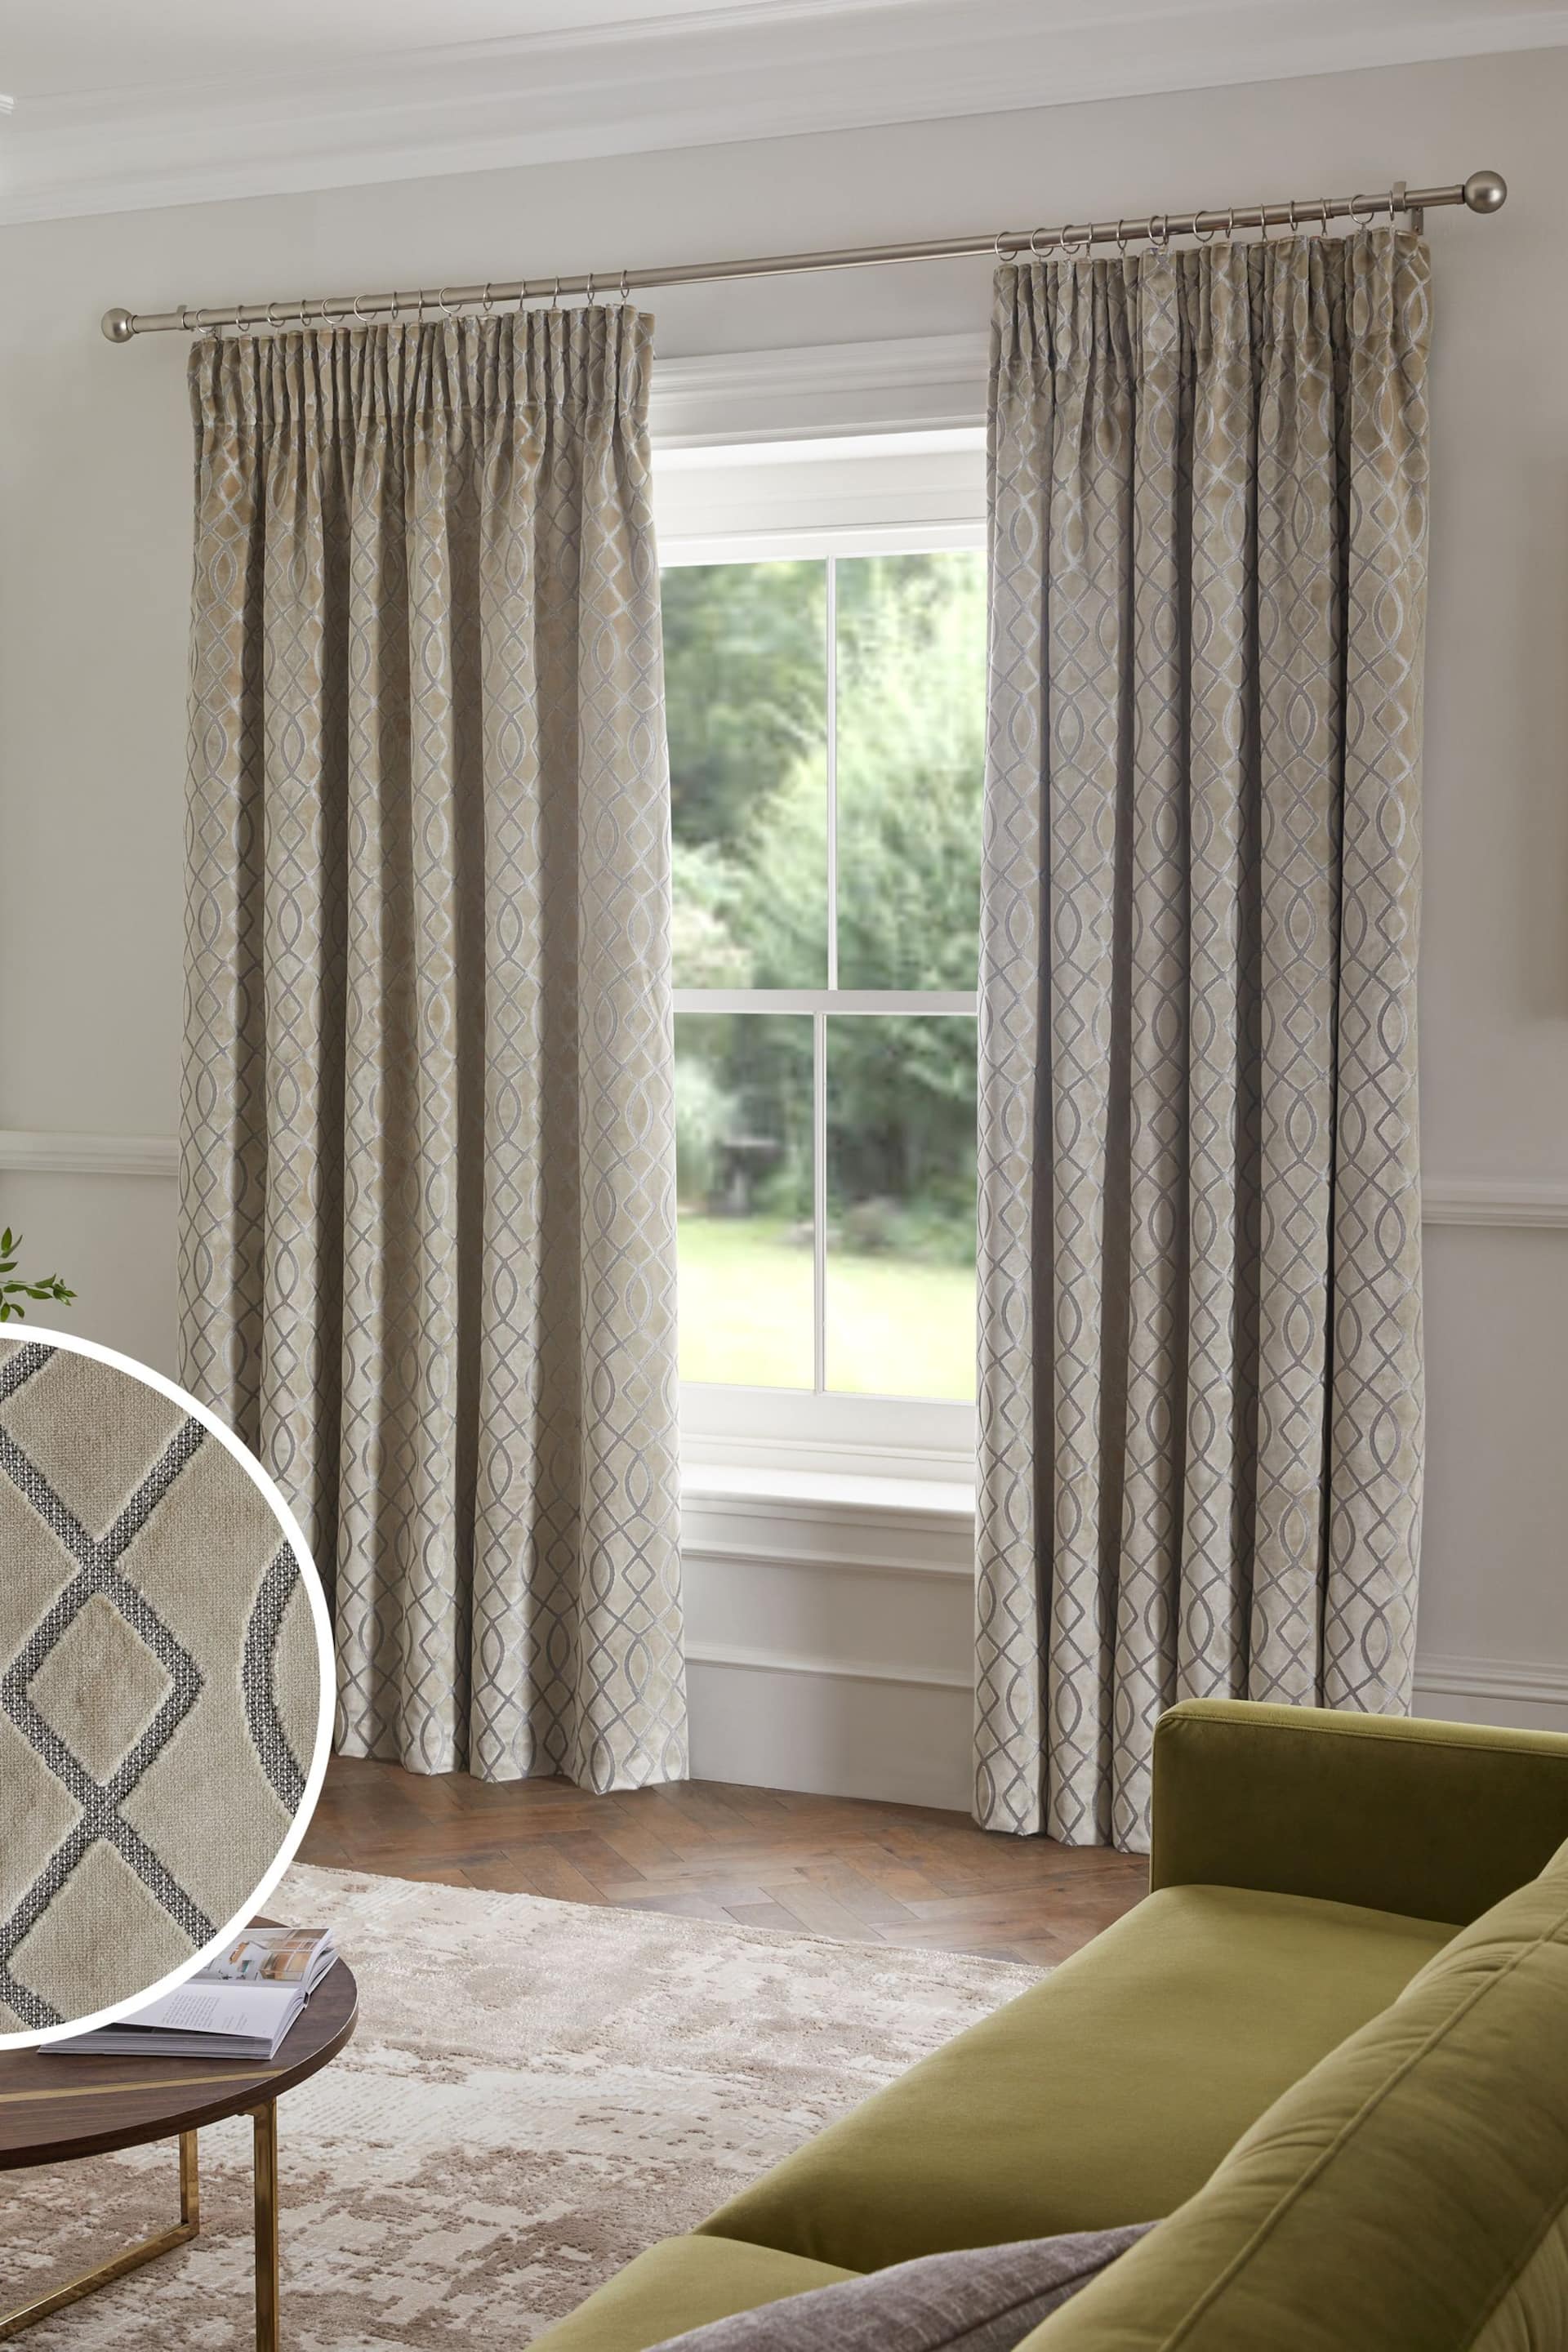 Champagne Gold Next Collection Luxe Heavyweight Maeve Damask Velvet Pencil Pleat Lined Curtains - Image 1 of 6